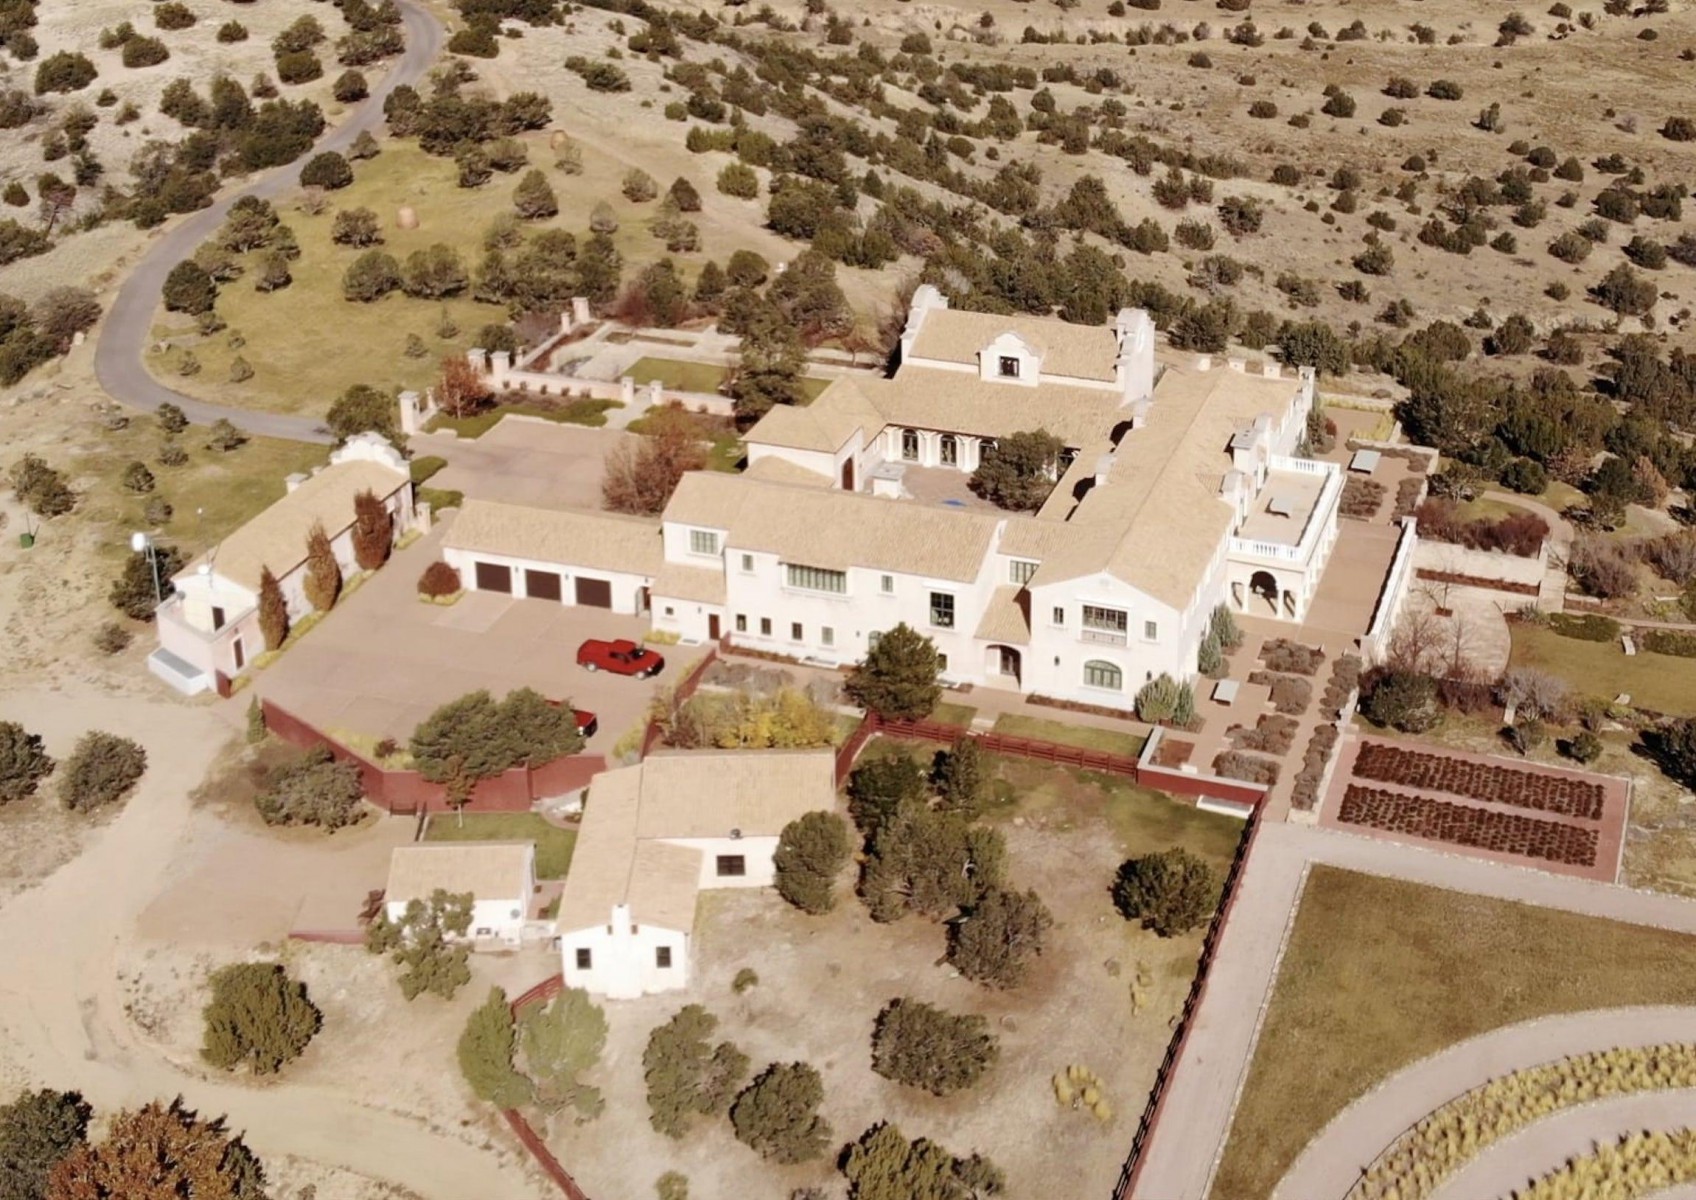  Jeffrey Epstein's notorious 'baby making Zorro Ranch' in the New Mexico desert